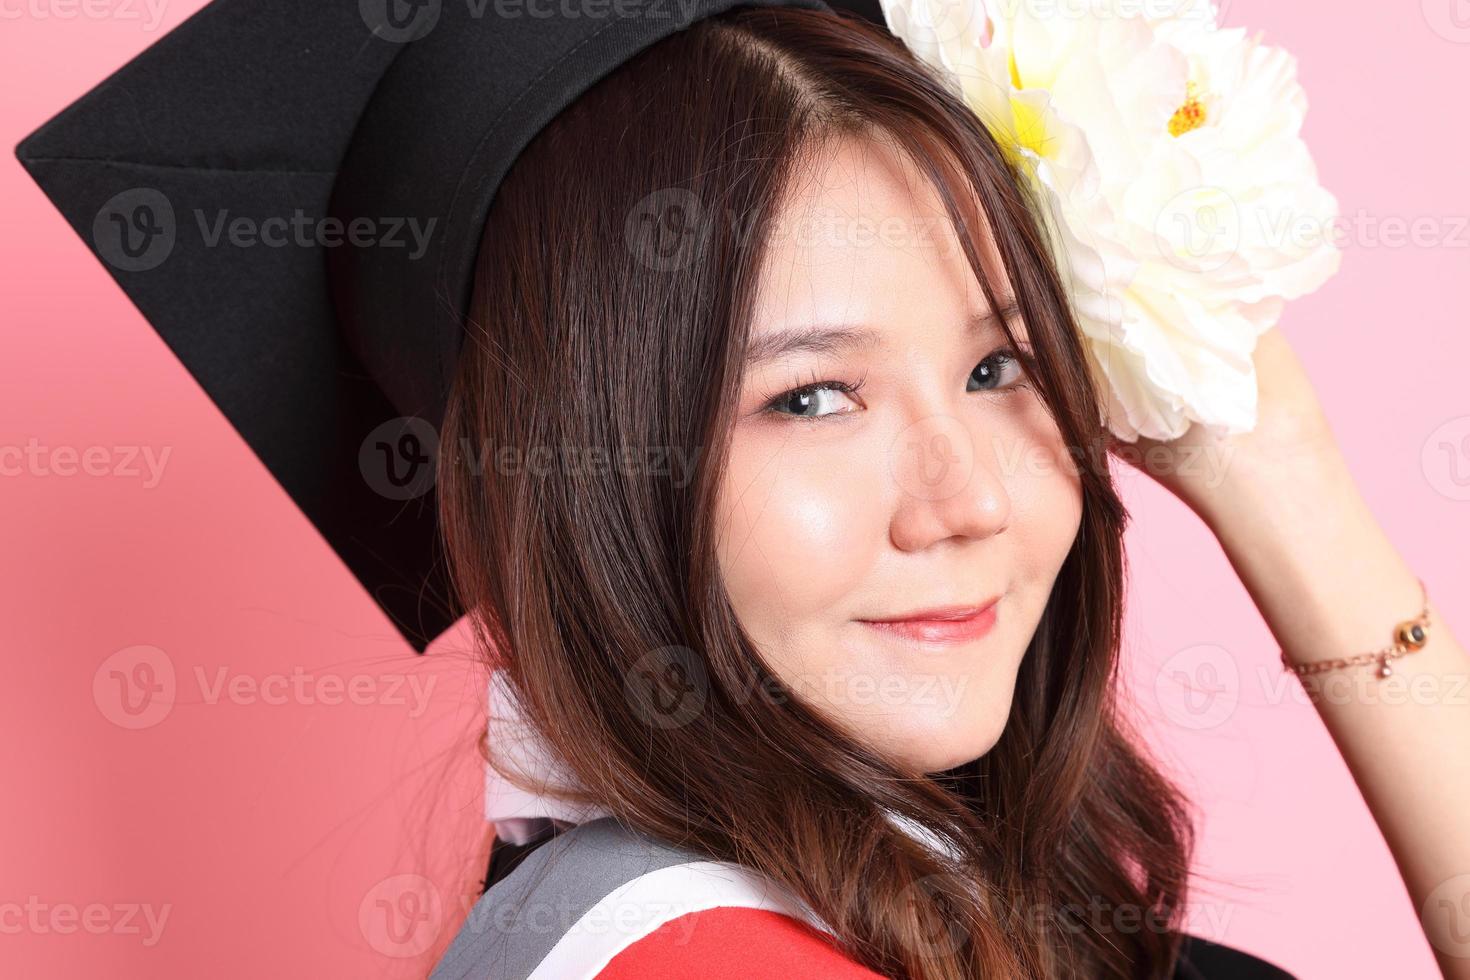 Girl with Graduation Gown photo